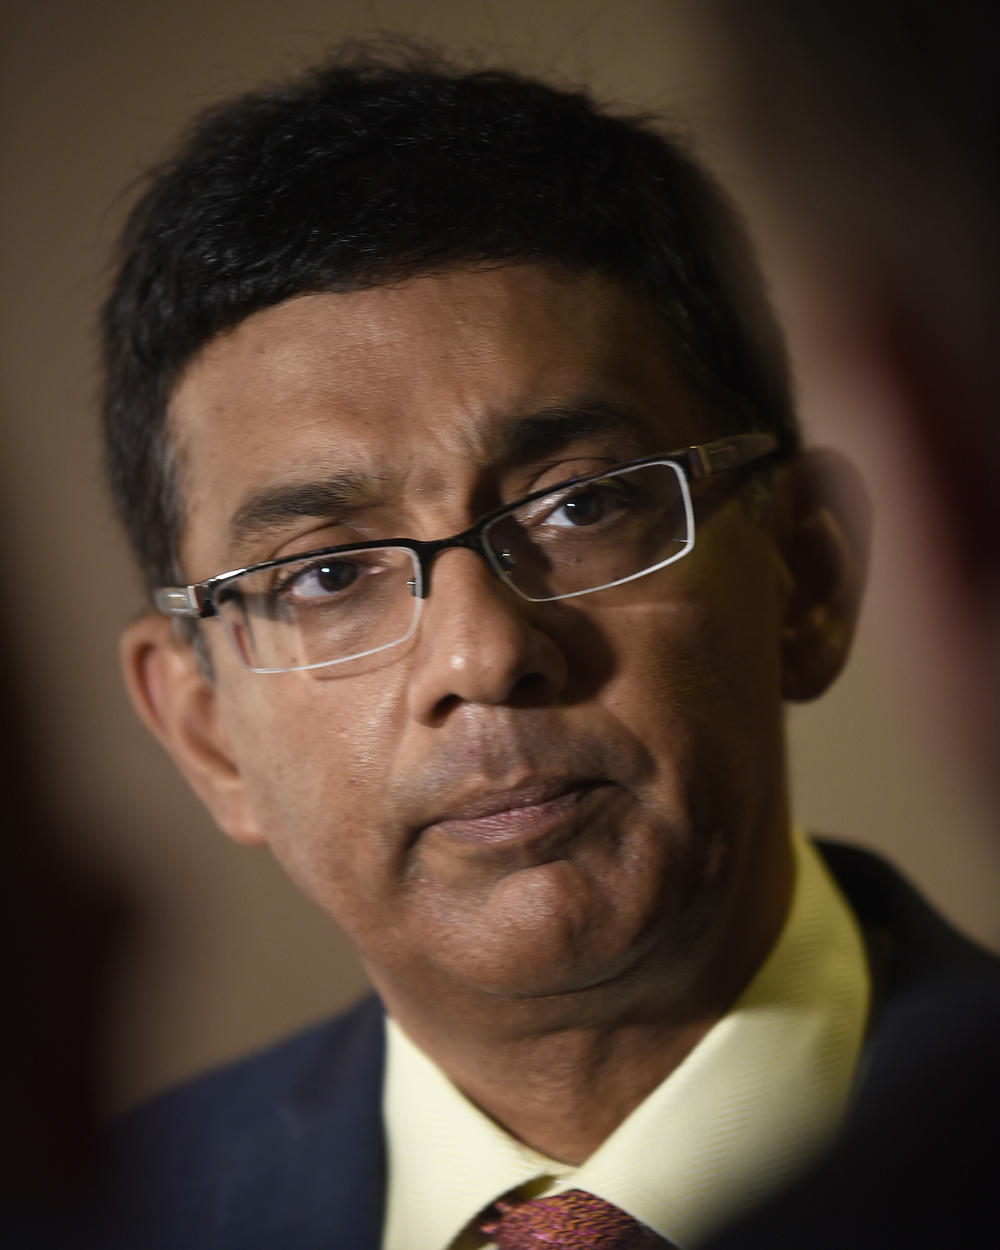 Dinesh D'Souza attends the premiere of his film <em>Death of a Nation</em> in Washington, D.C., in 2018. He donated $100,000 to the Patriot Freedom Project, an organization that is providing financial help to Jan. 6 defendants.